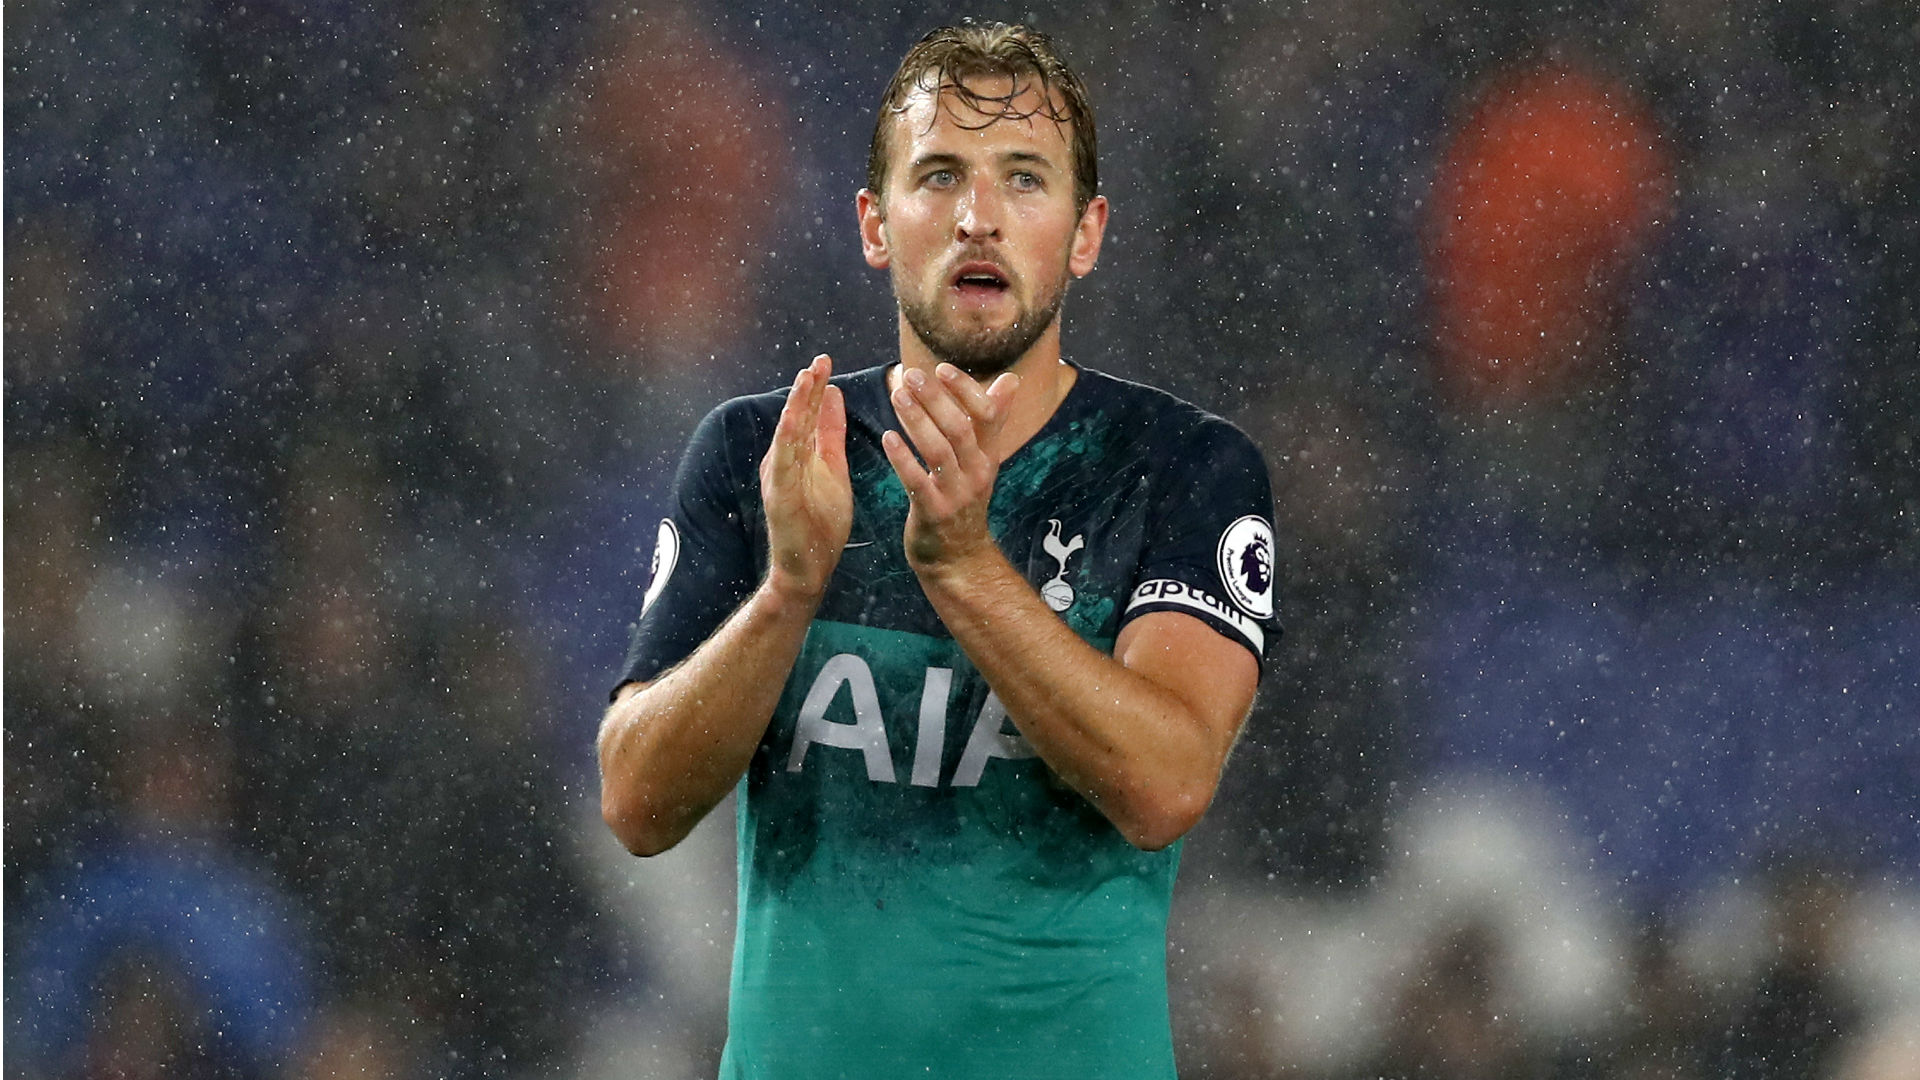 Harry Kane is expected to be absent until March after damaging ankle ligaments in Tottenham's defeat to Manchester United.